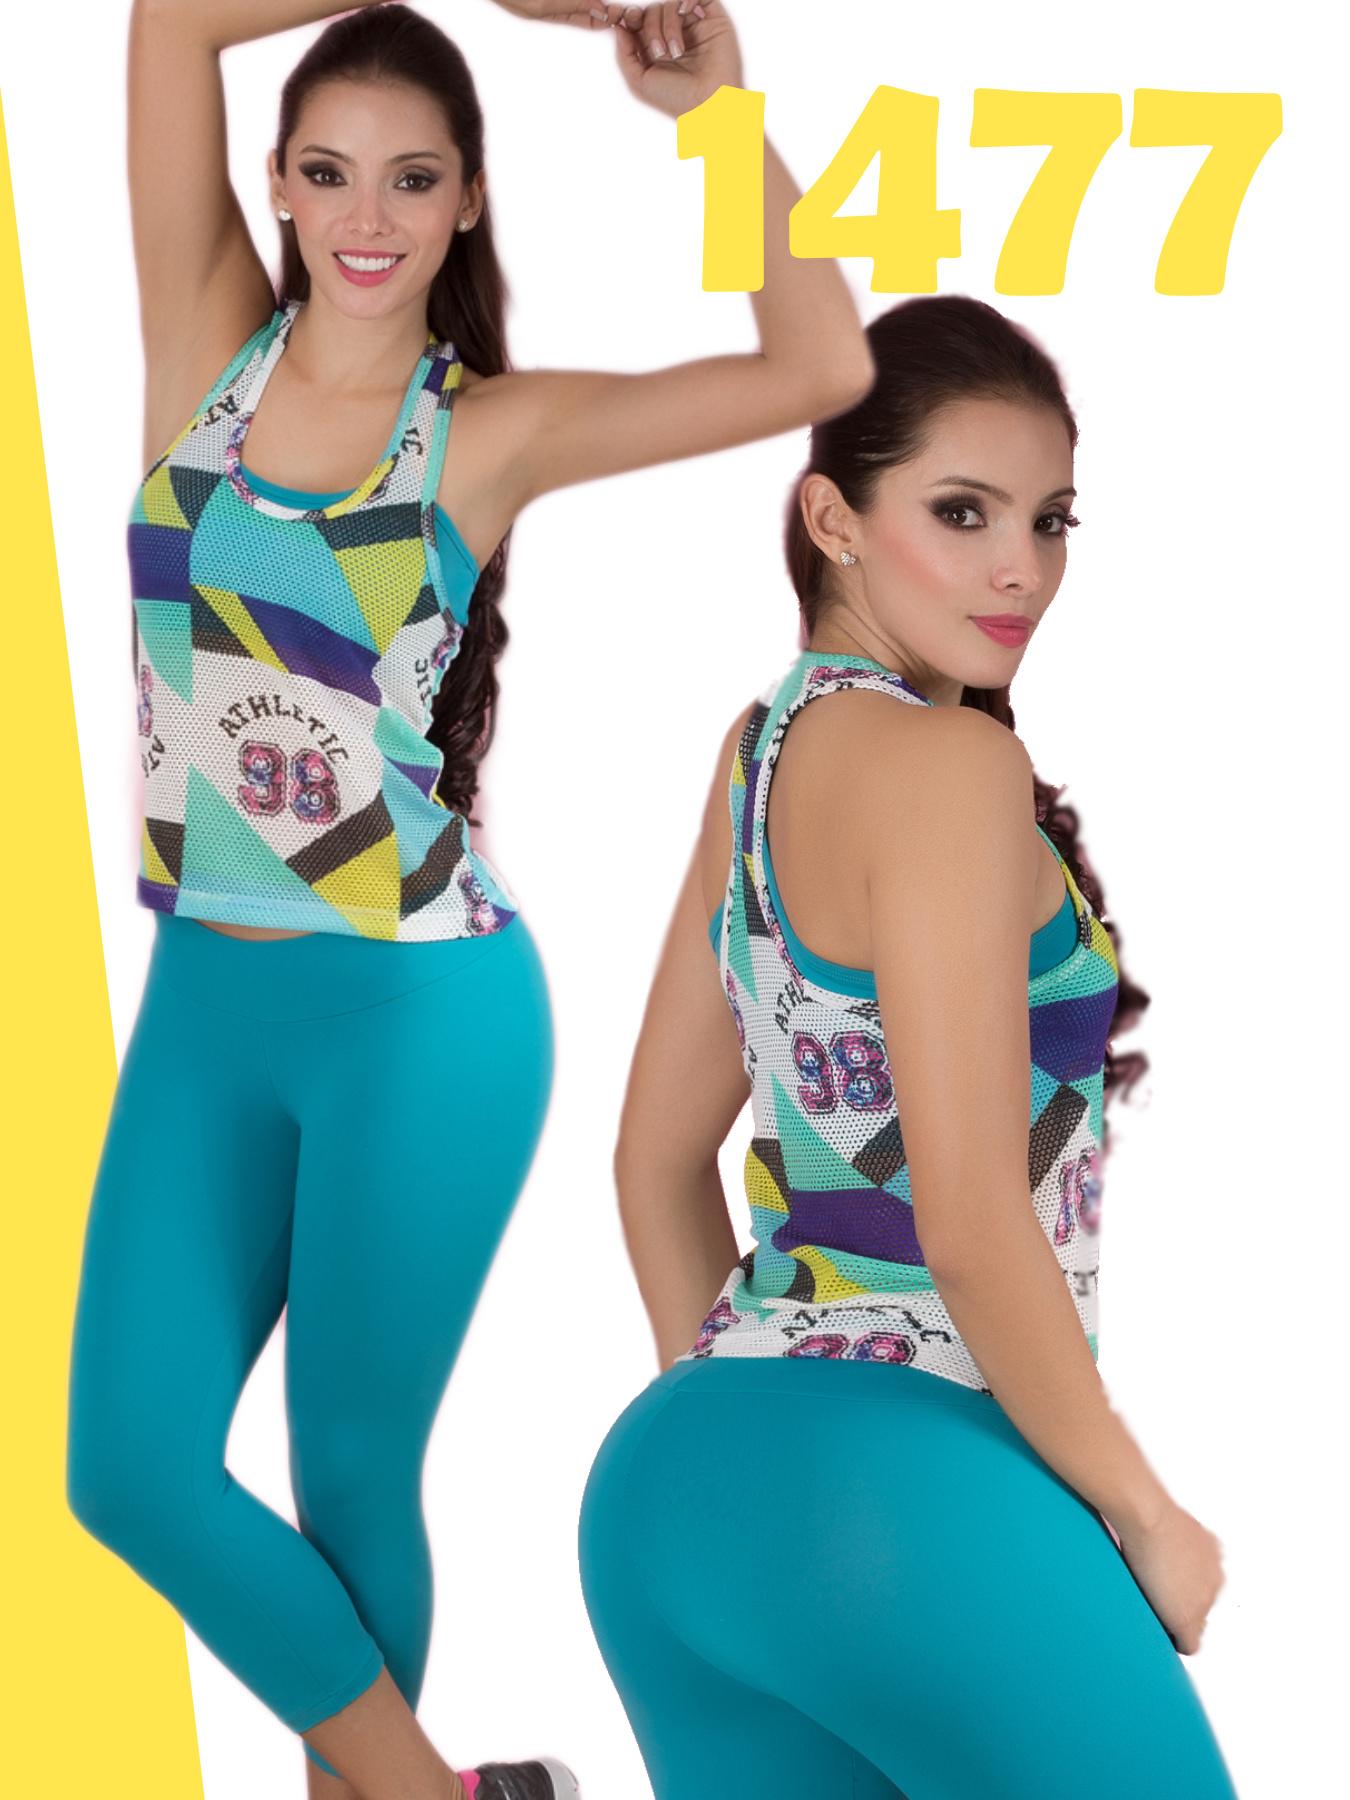 lanza Infectar reptiles Comprar ROPA DEPORTIVA COLOMBIANA online